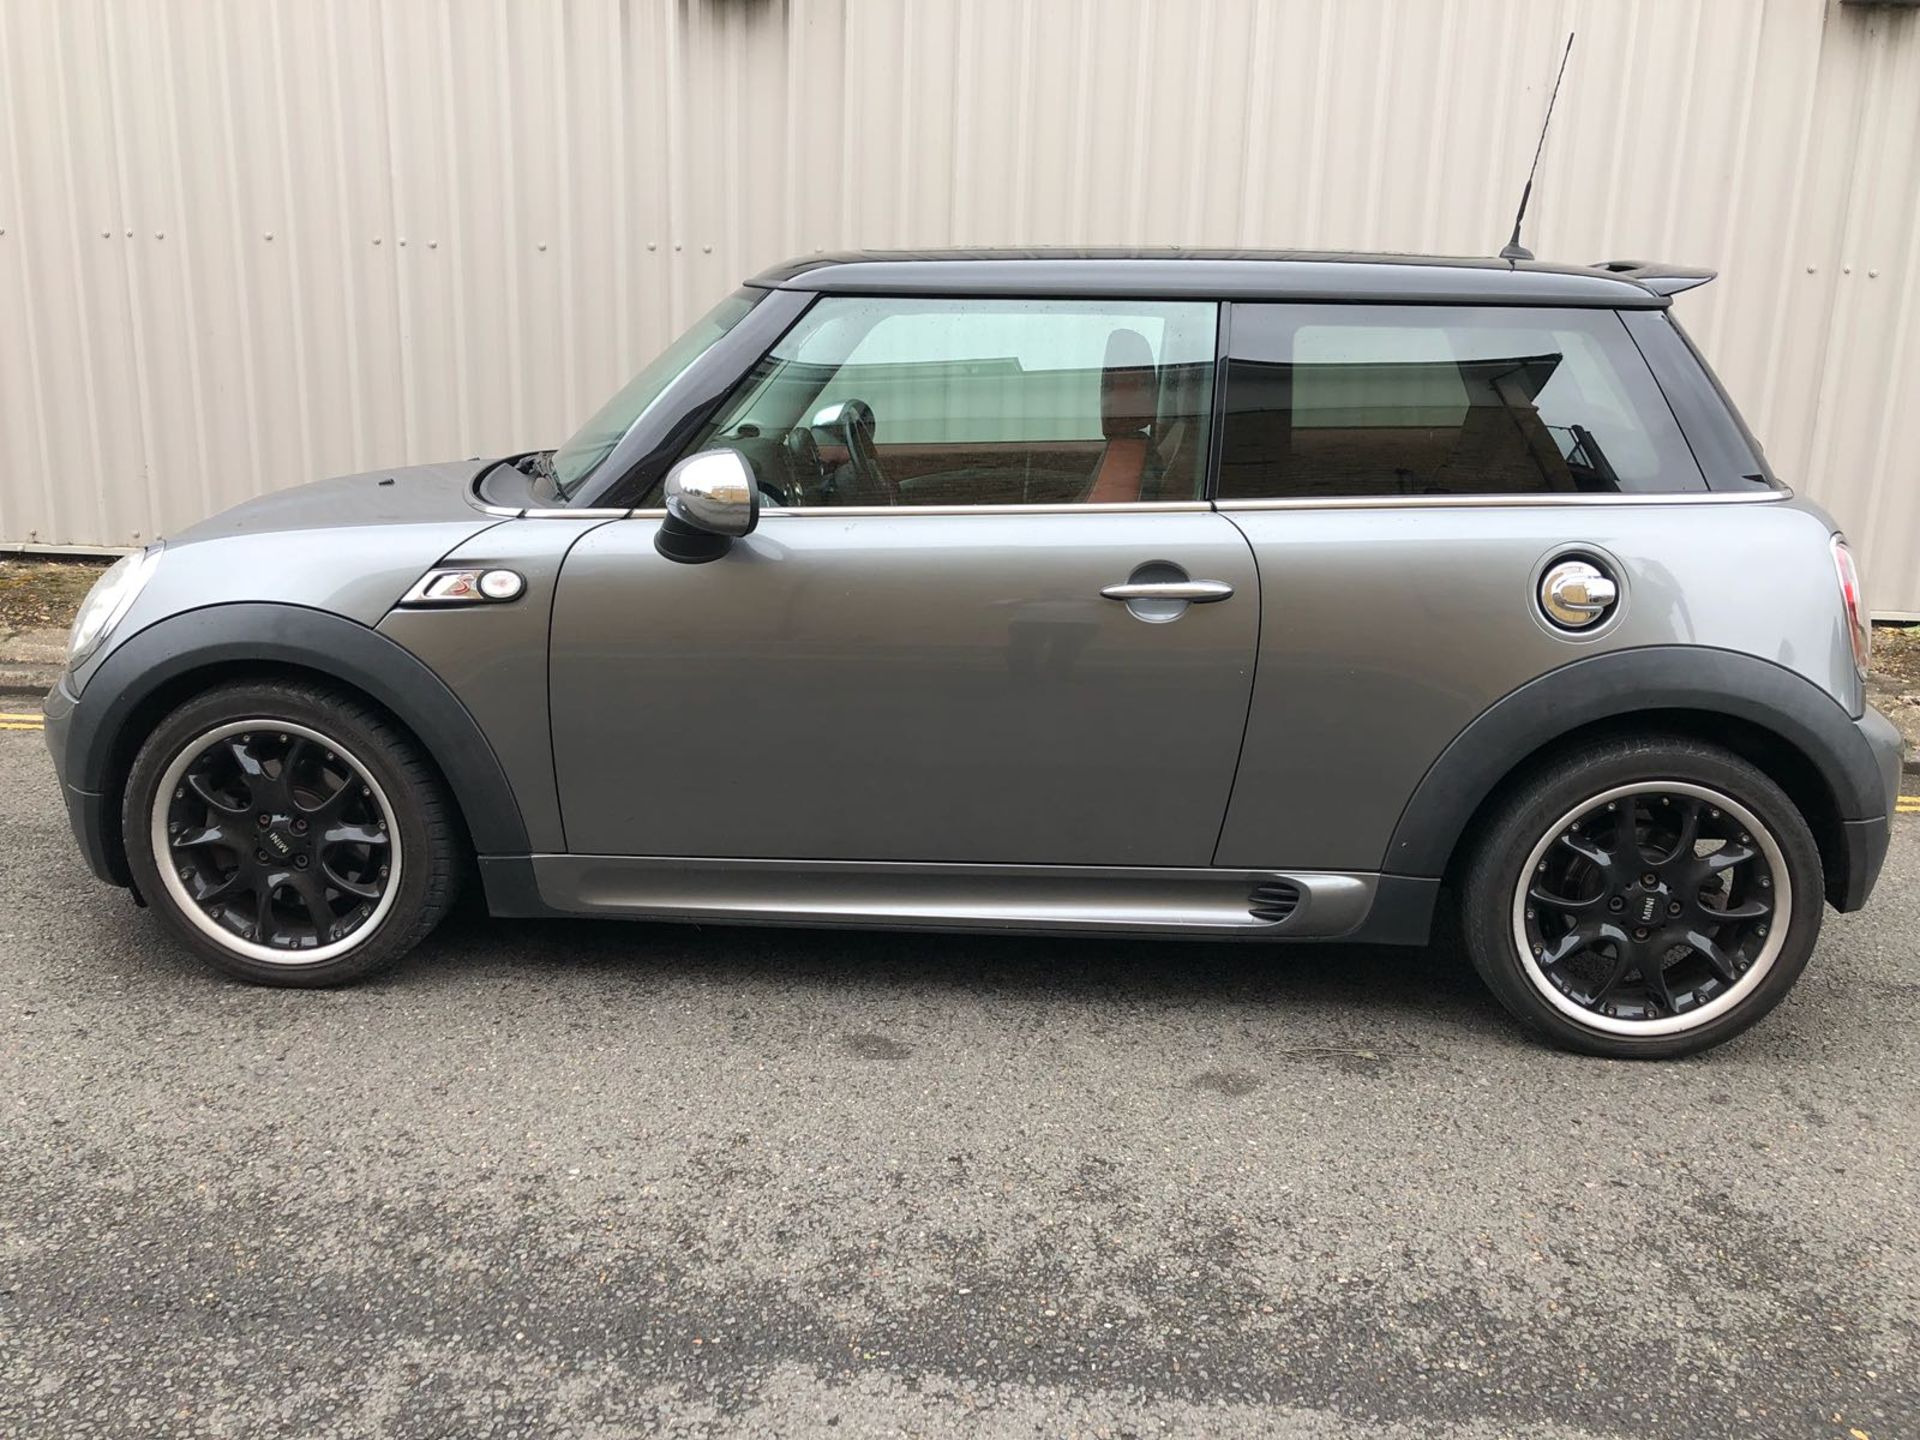 MINI COOPER S JOHN WORKS. 2009/09. 79,000 miles. Full history with 9 stamps in the book. - Image 5 of 19